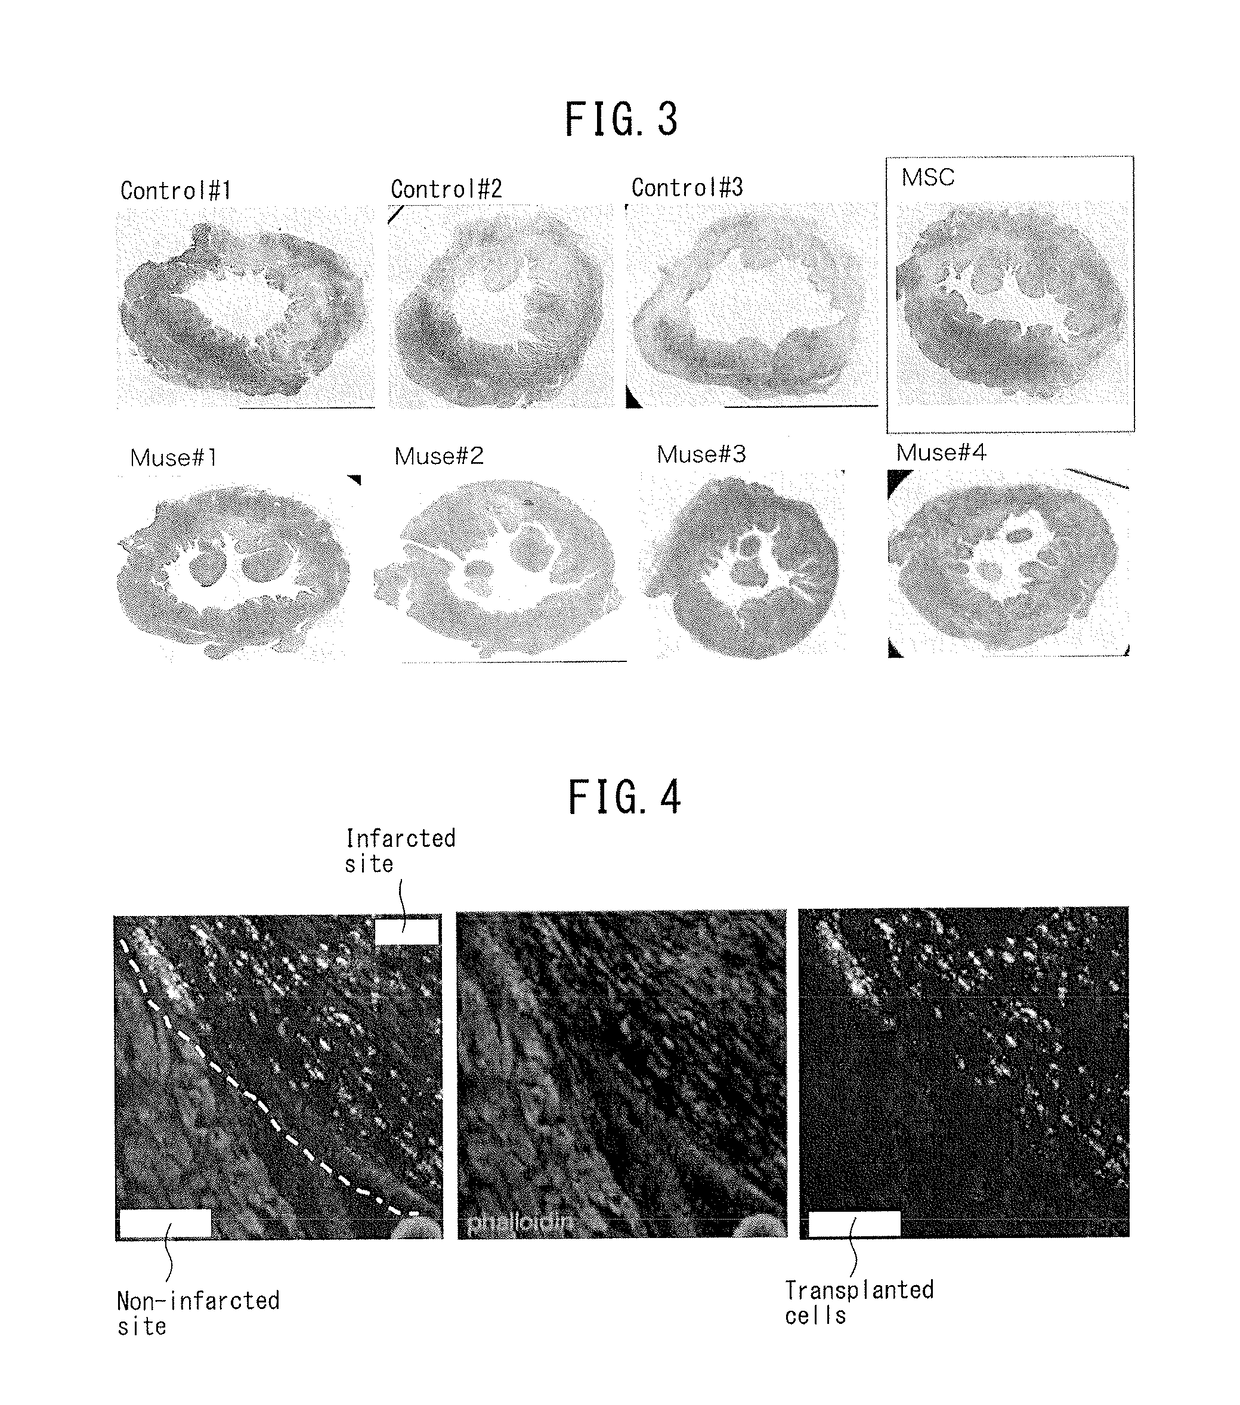 Pluripotent stem cell that induces repair and regeneration after myocardial infarction